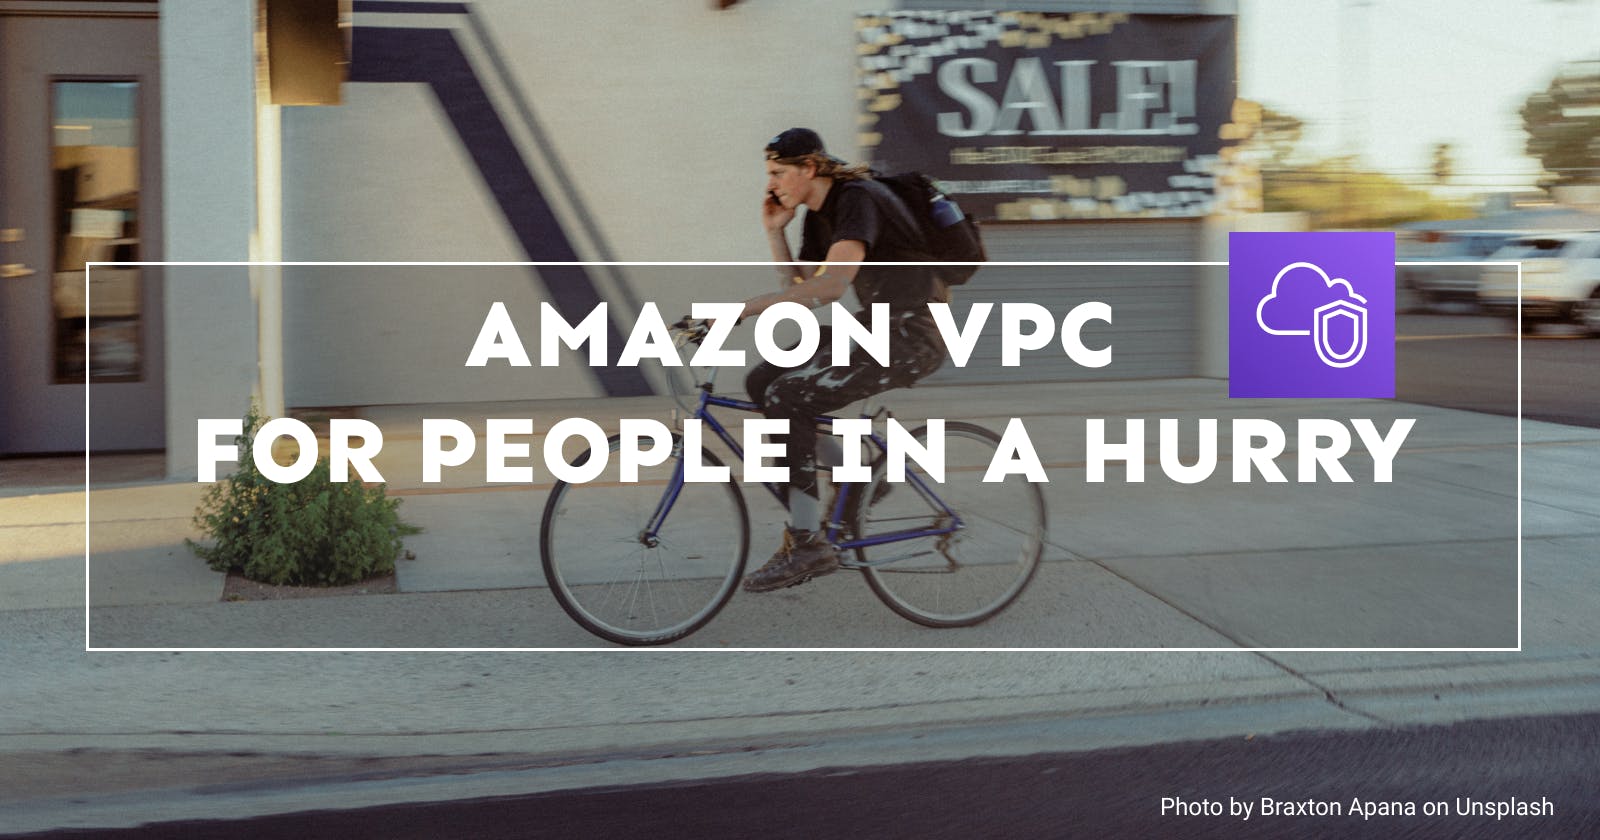 Amazon VPC for People in a Hurry